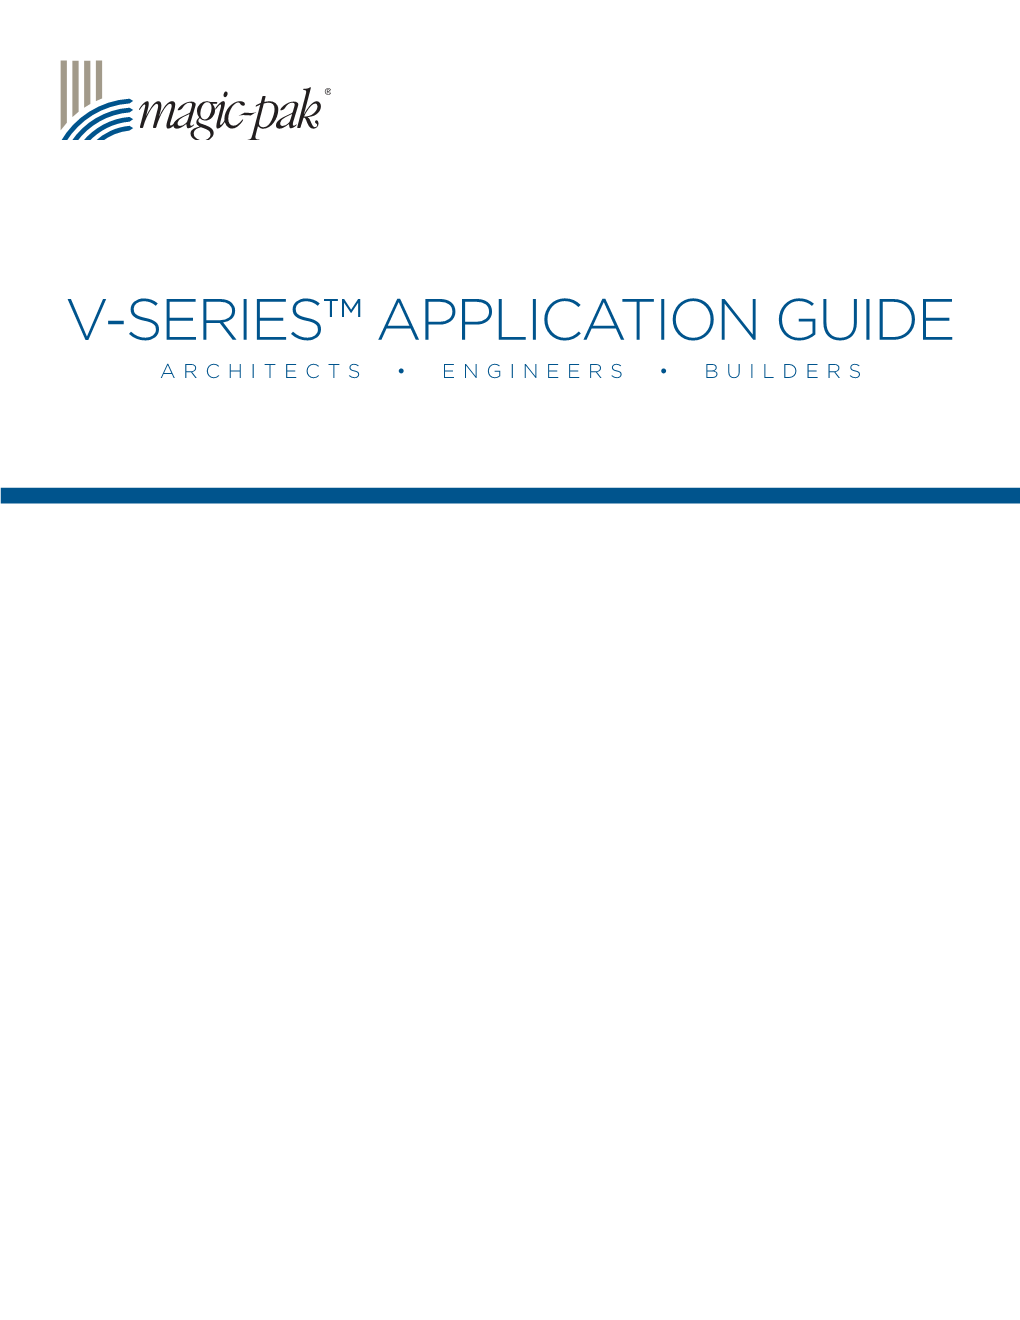 V-Series™ Application Guide Architects • Engineers • Builders